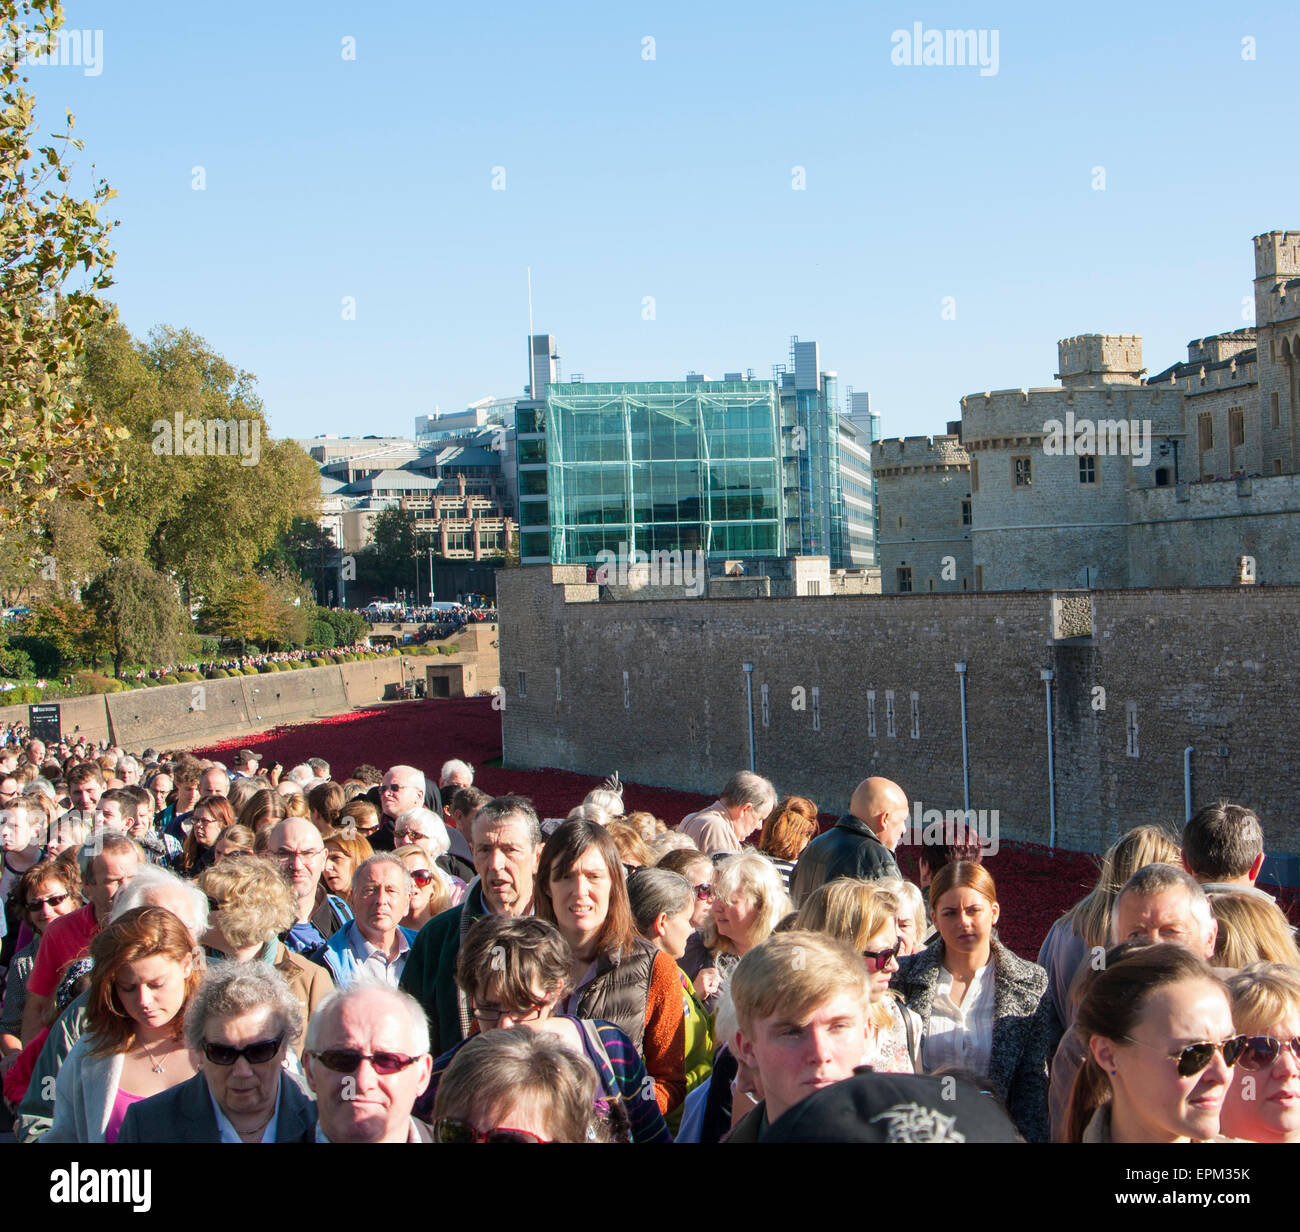 Crowds visiting Ceramic Poppies In London Stock Photo